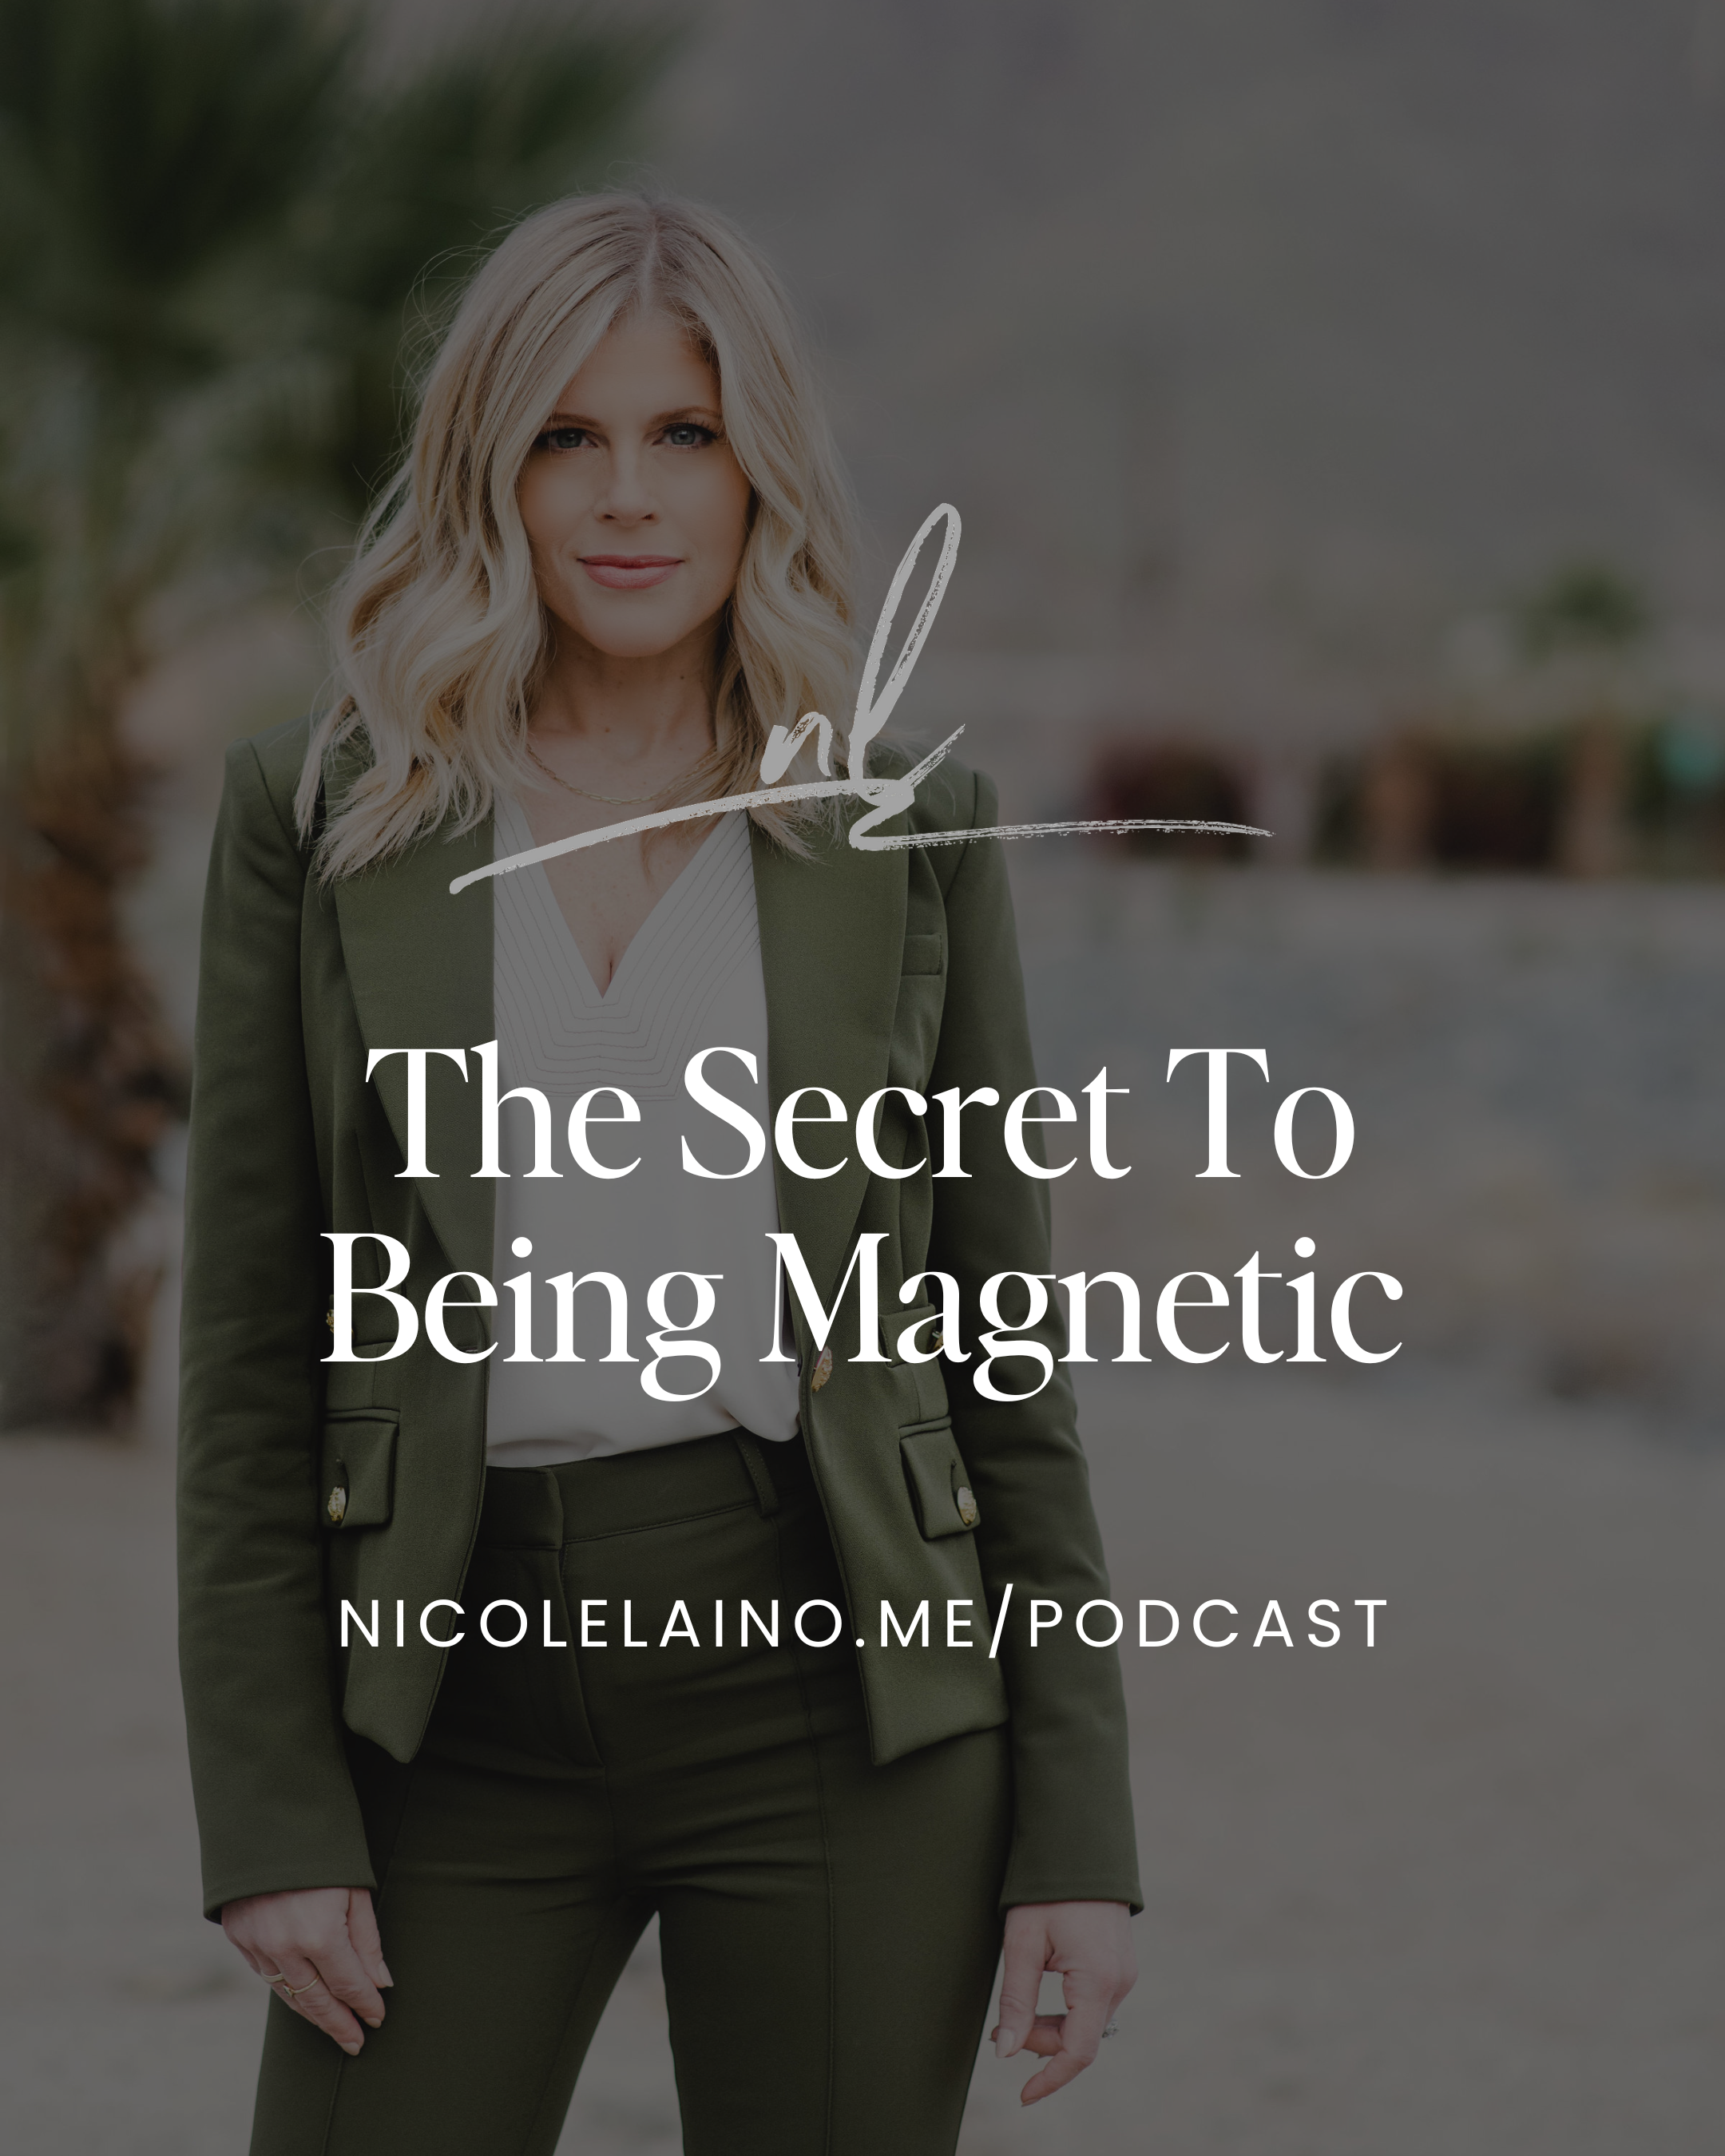 The Secret To Being Magnetic